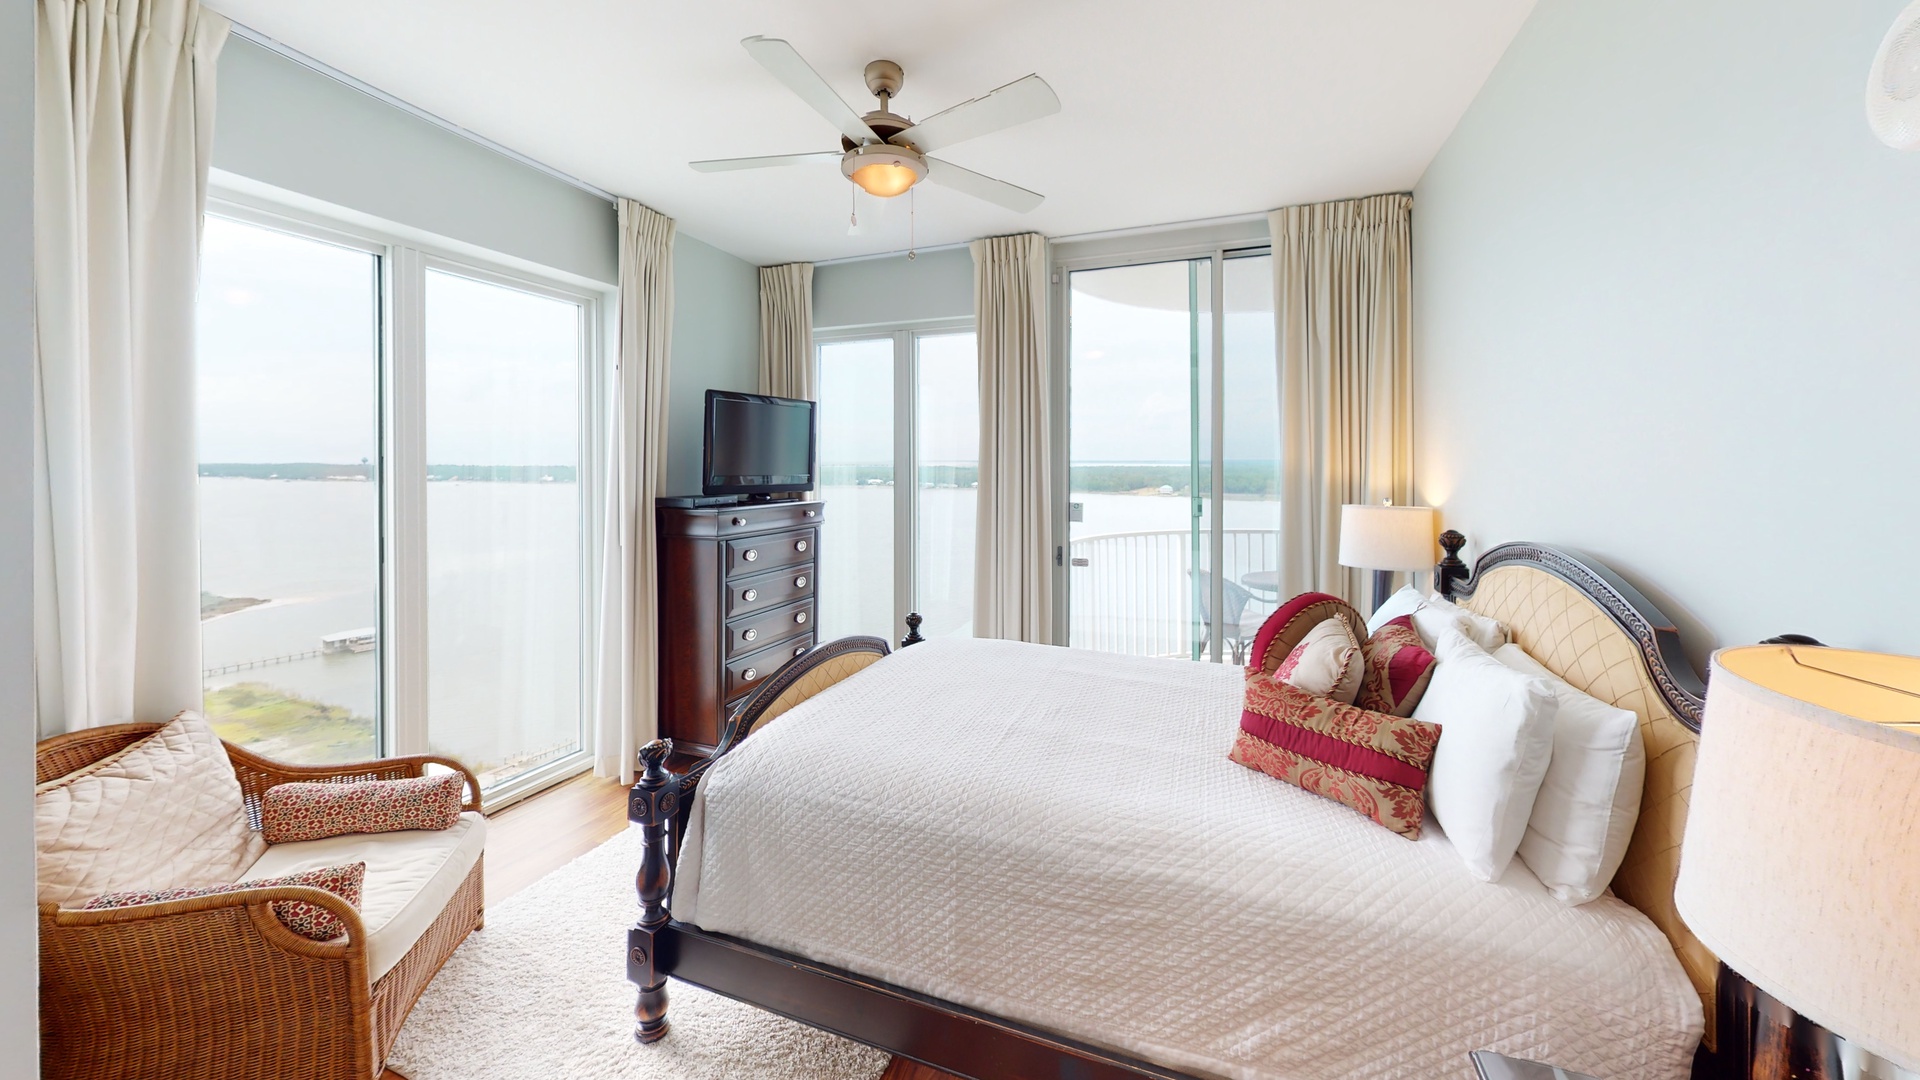 Bedroom 2 has water views, balcony access, TV and a private bathroom